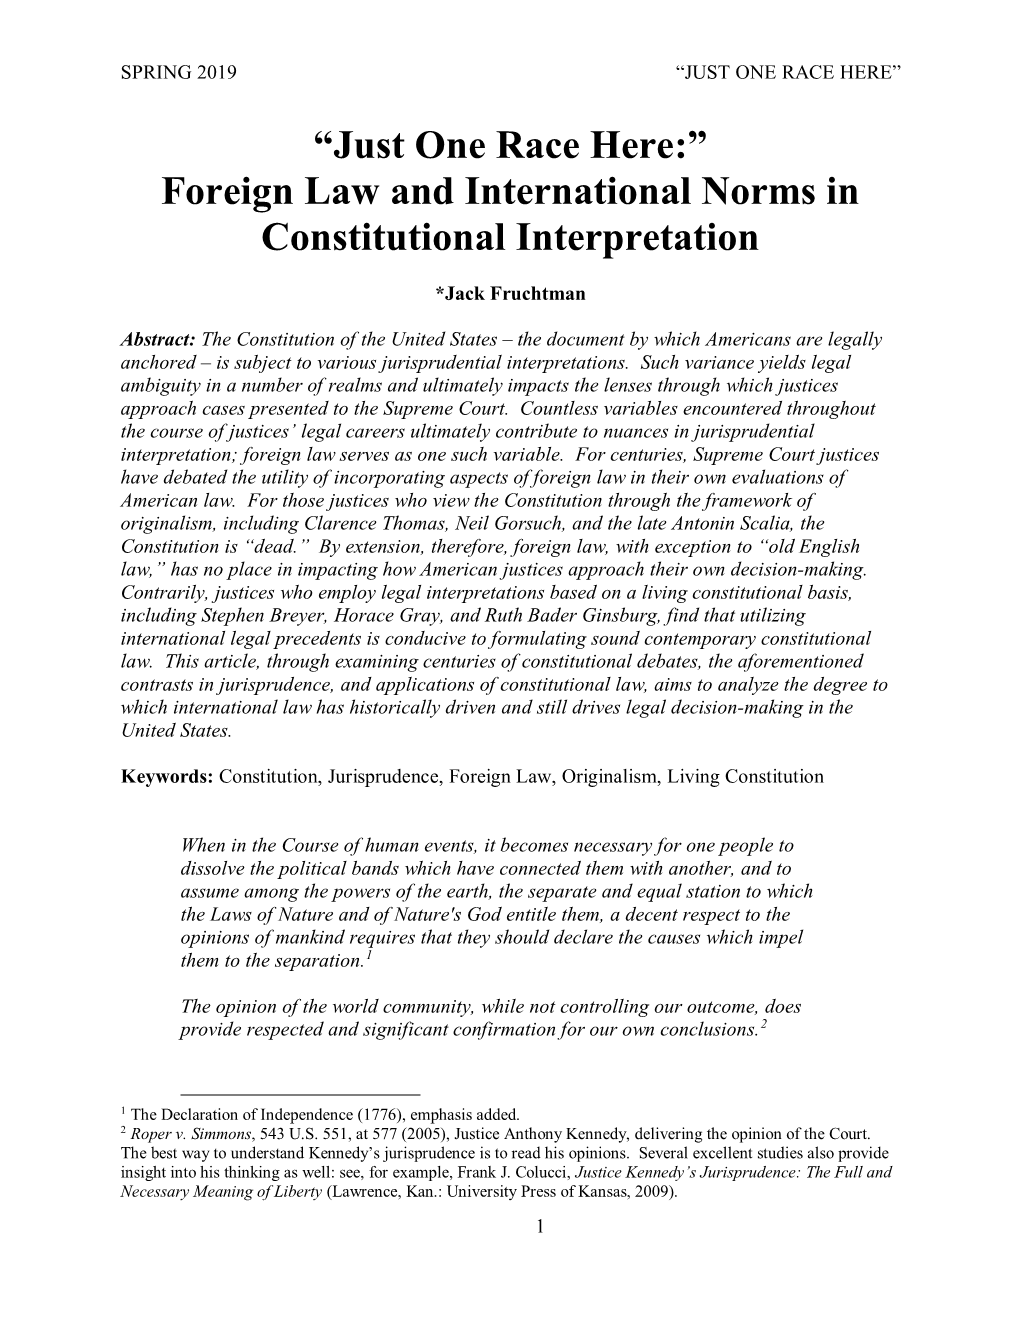 Foreign Law and International Norms in Constitutional Interpretation